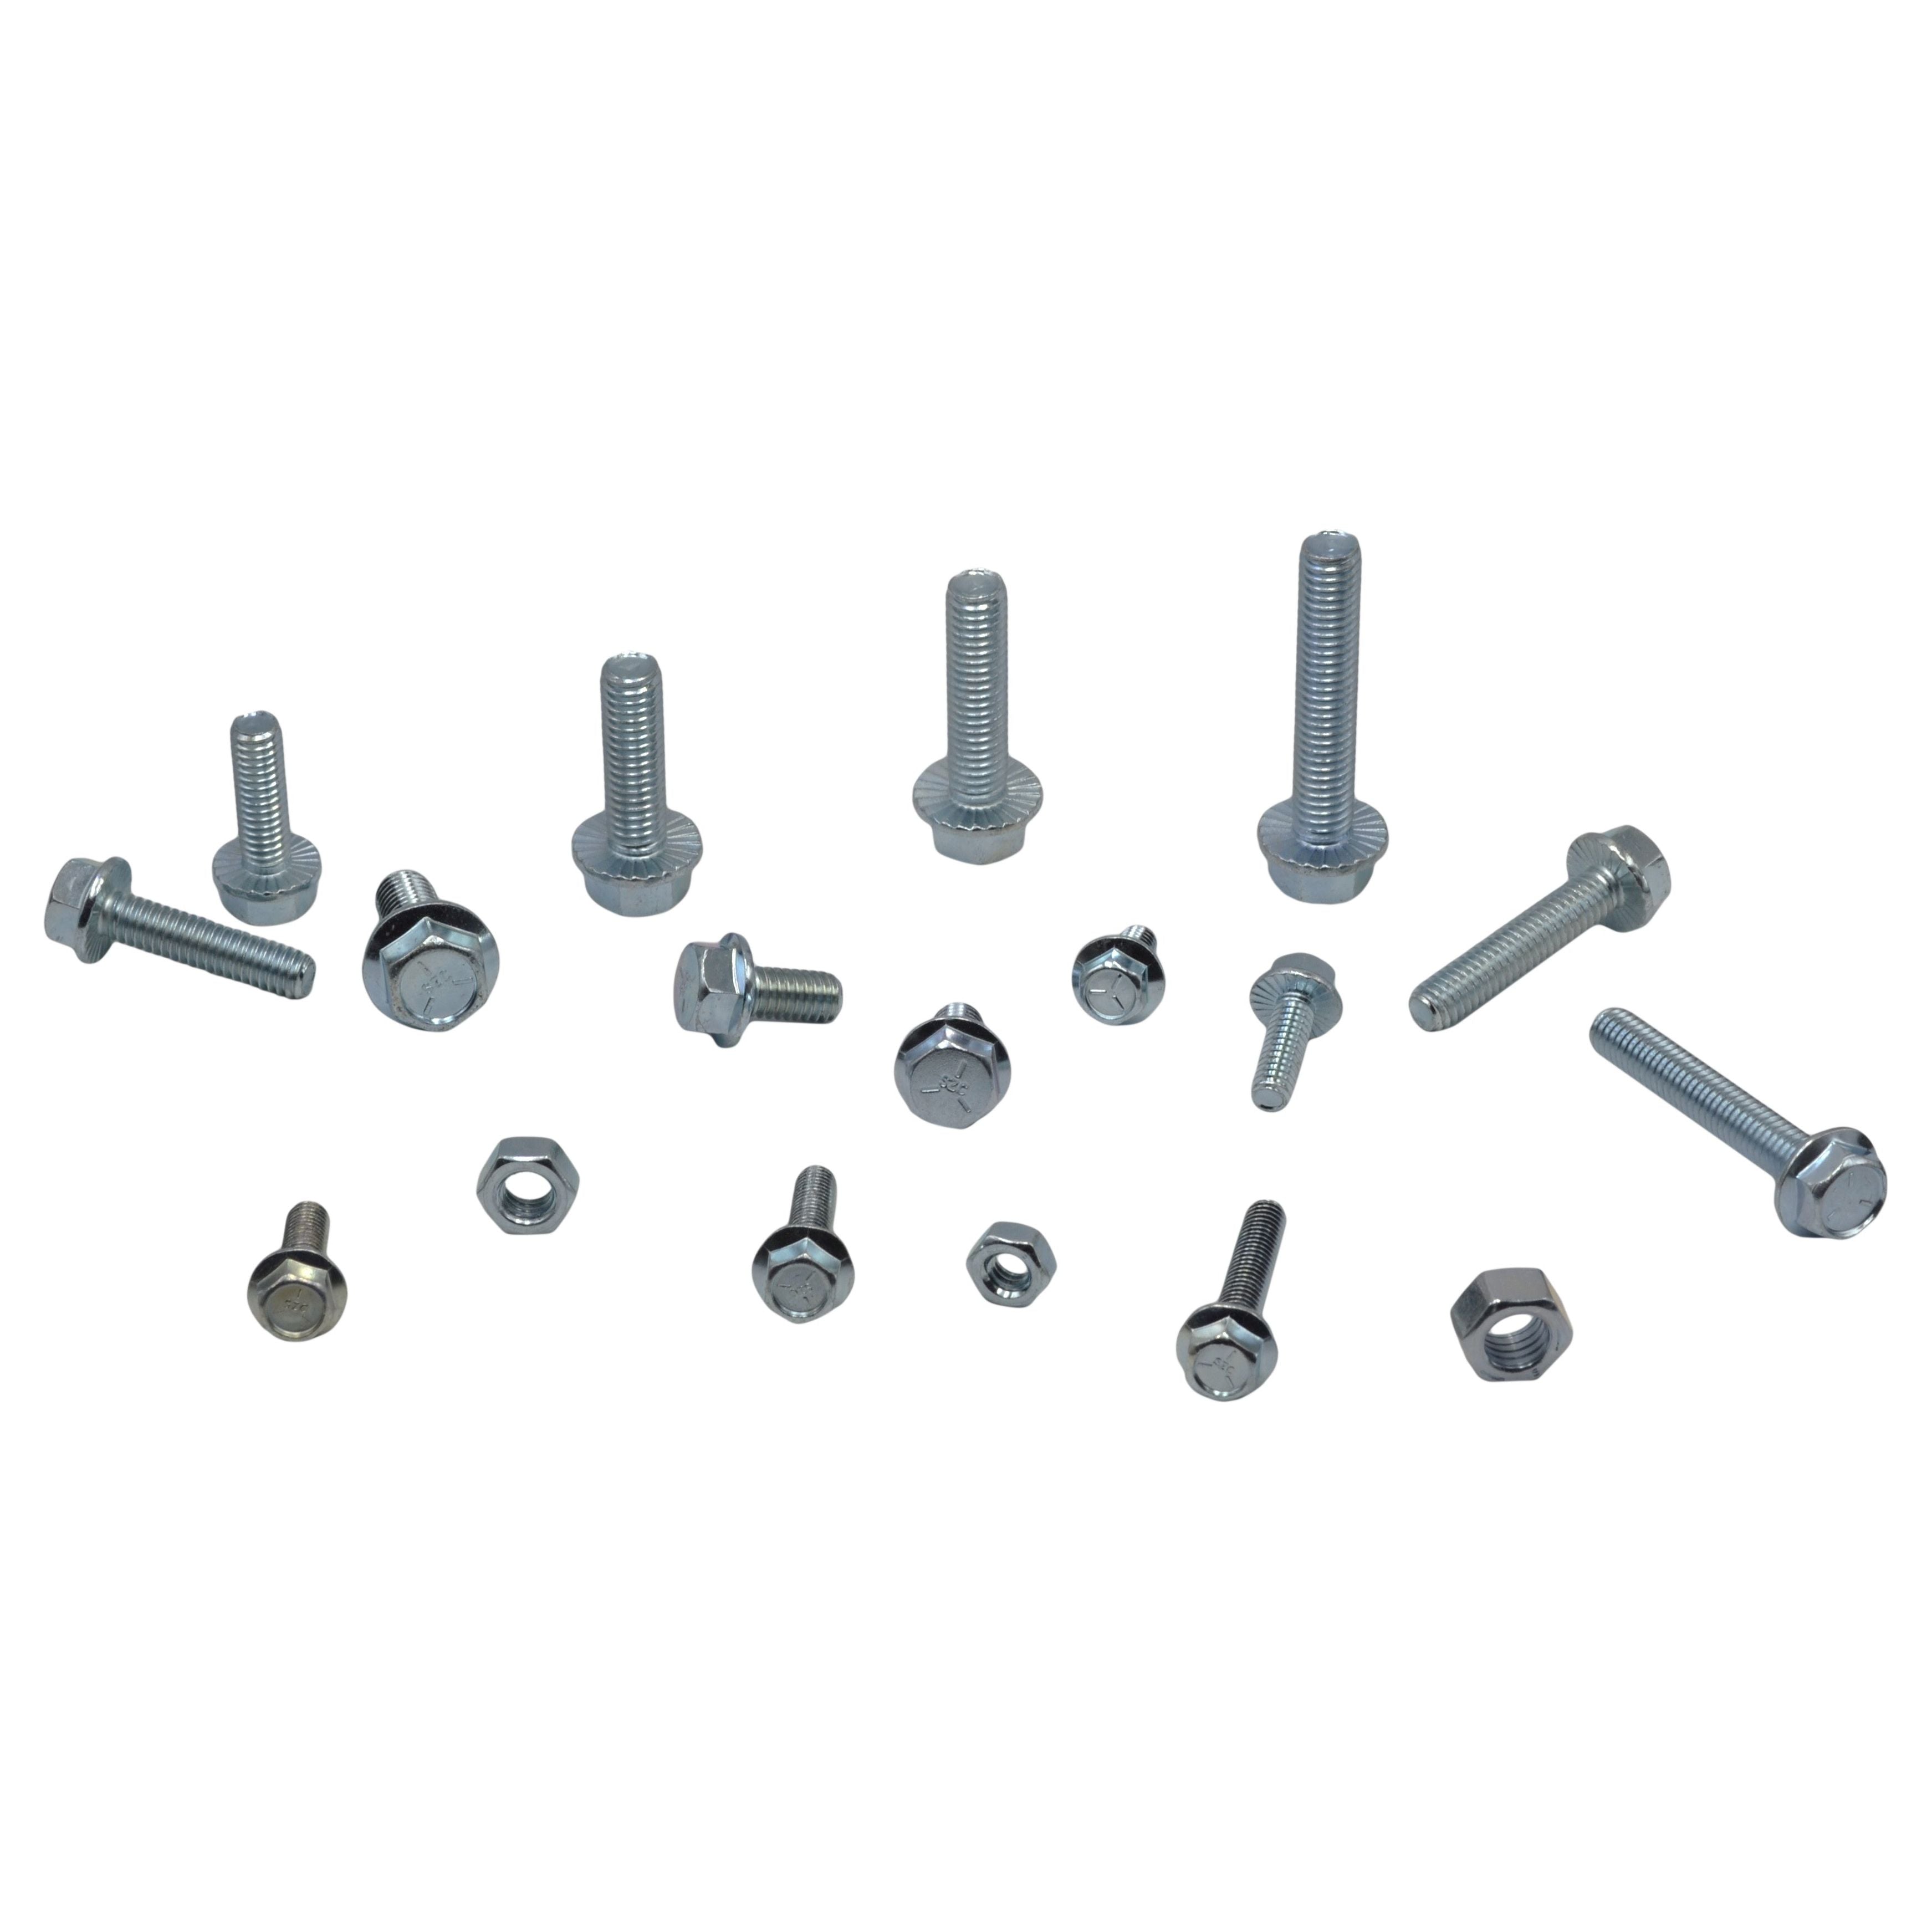 318 pc High Tensile Imperial Flange Nut and Bolt Grab Kit